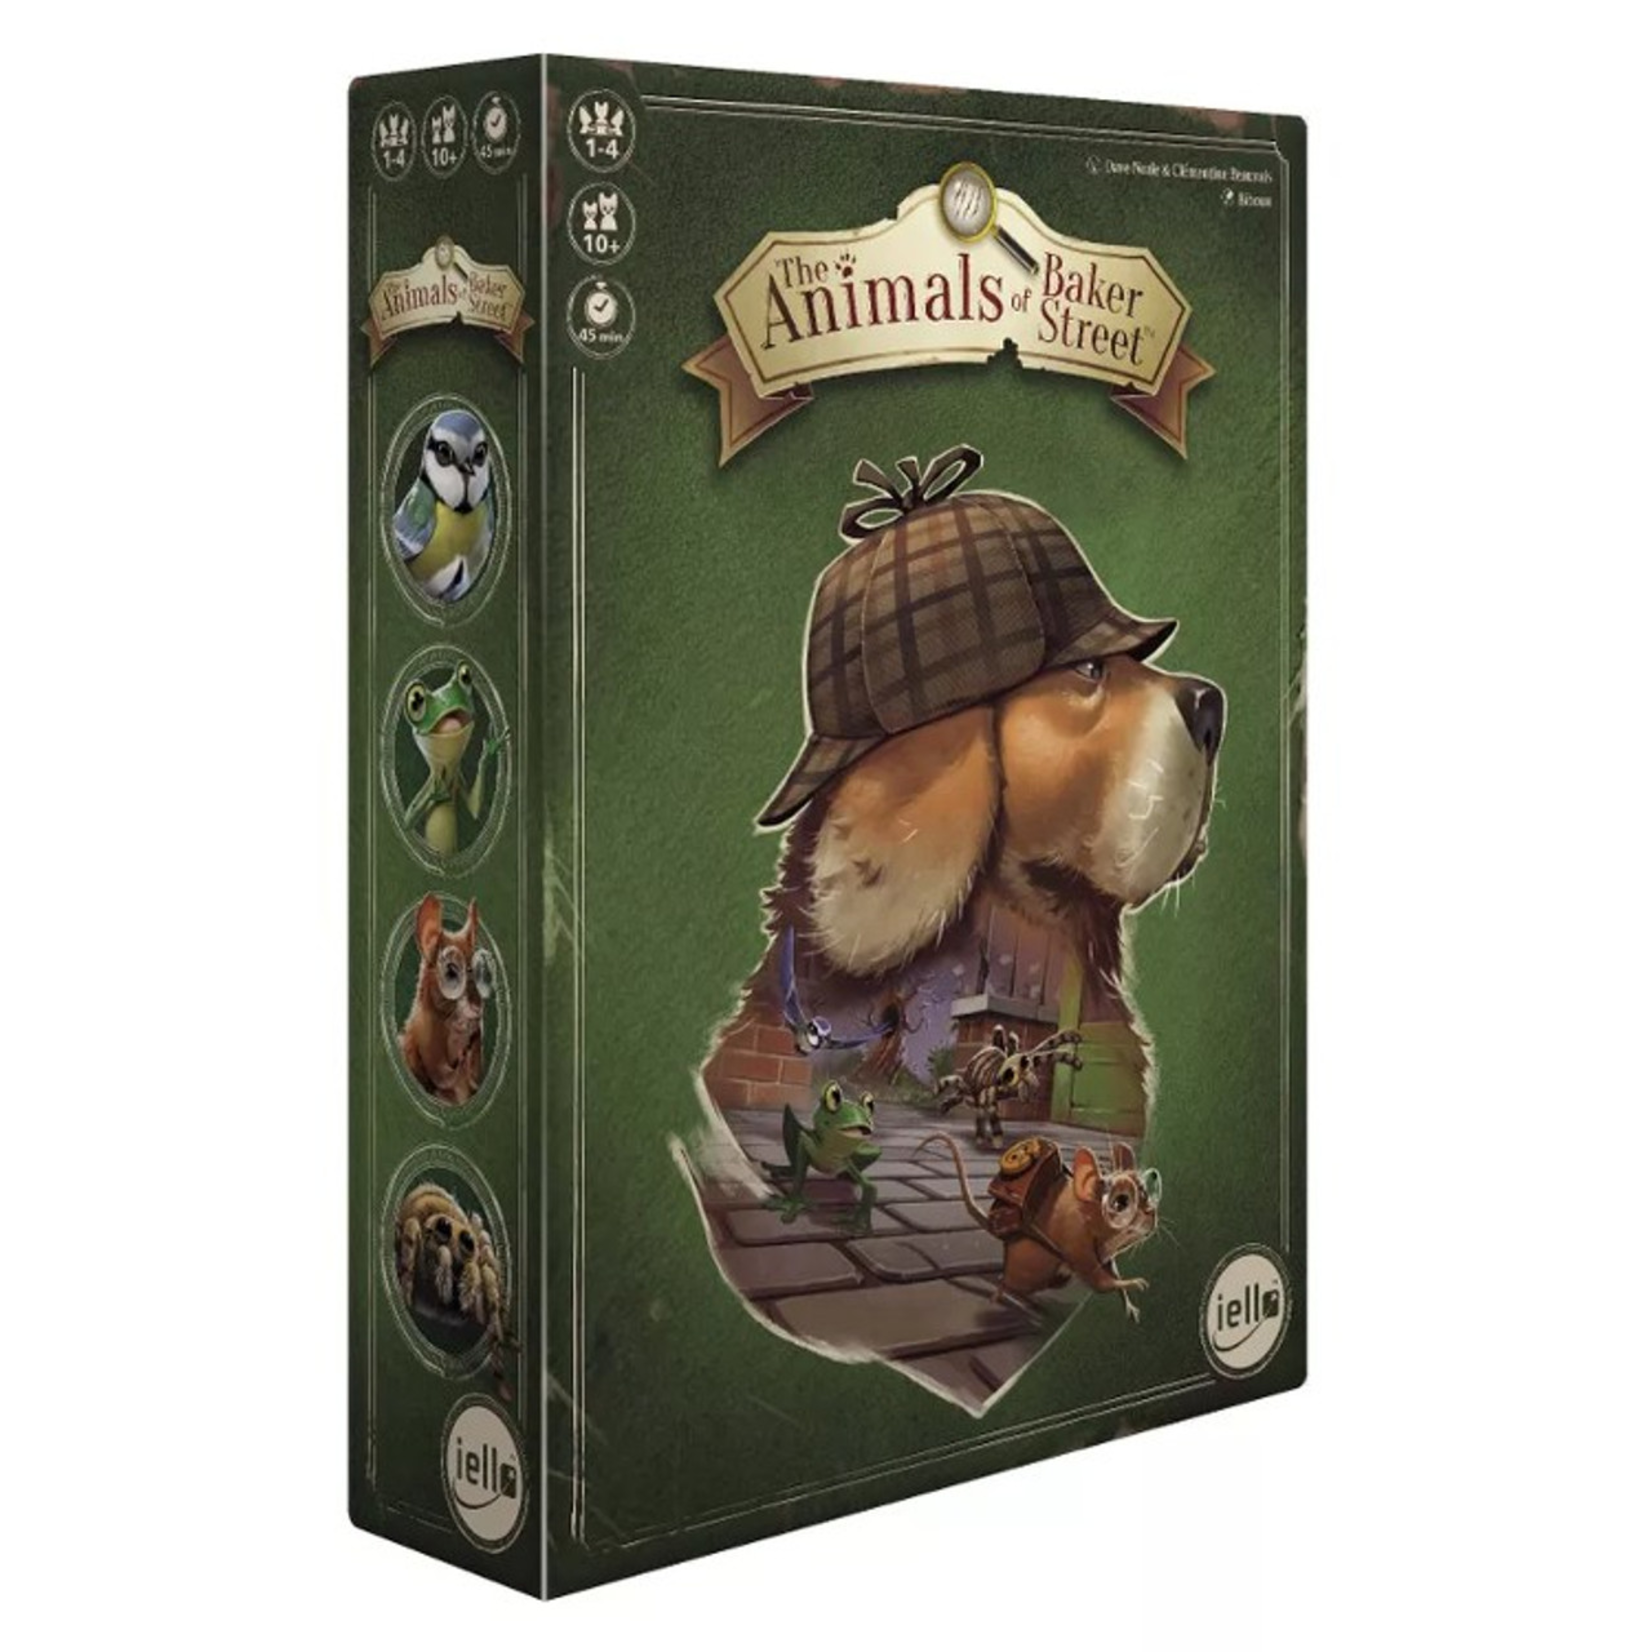 Iello Games The Animals of Baker Street